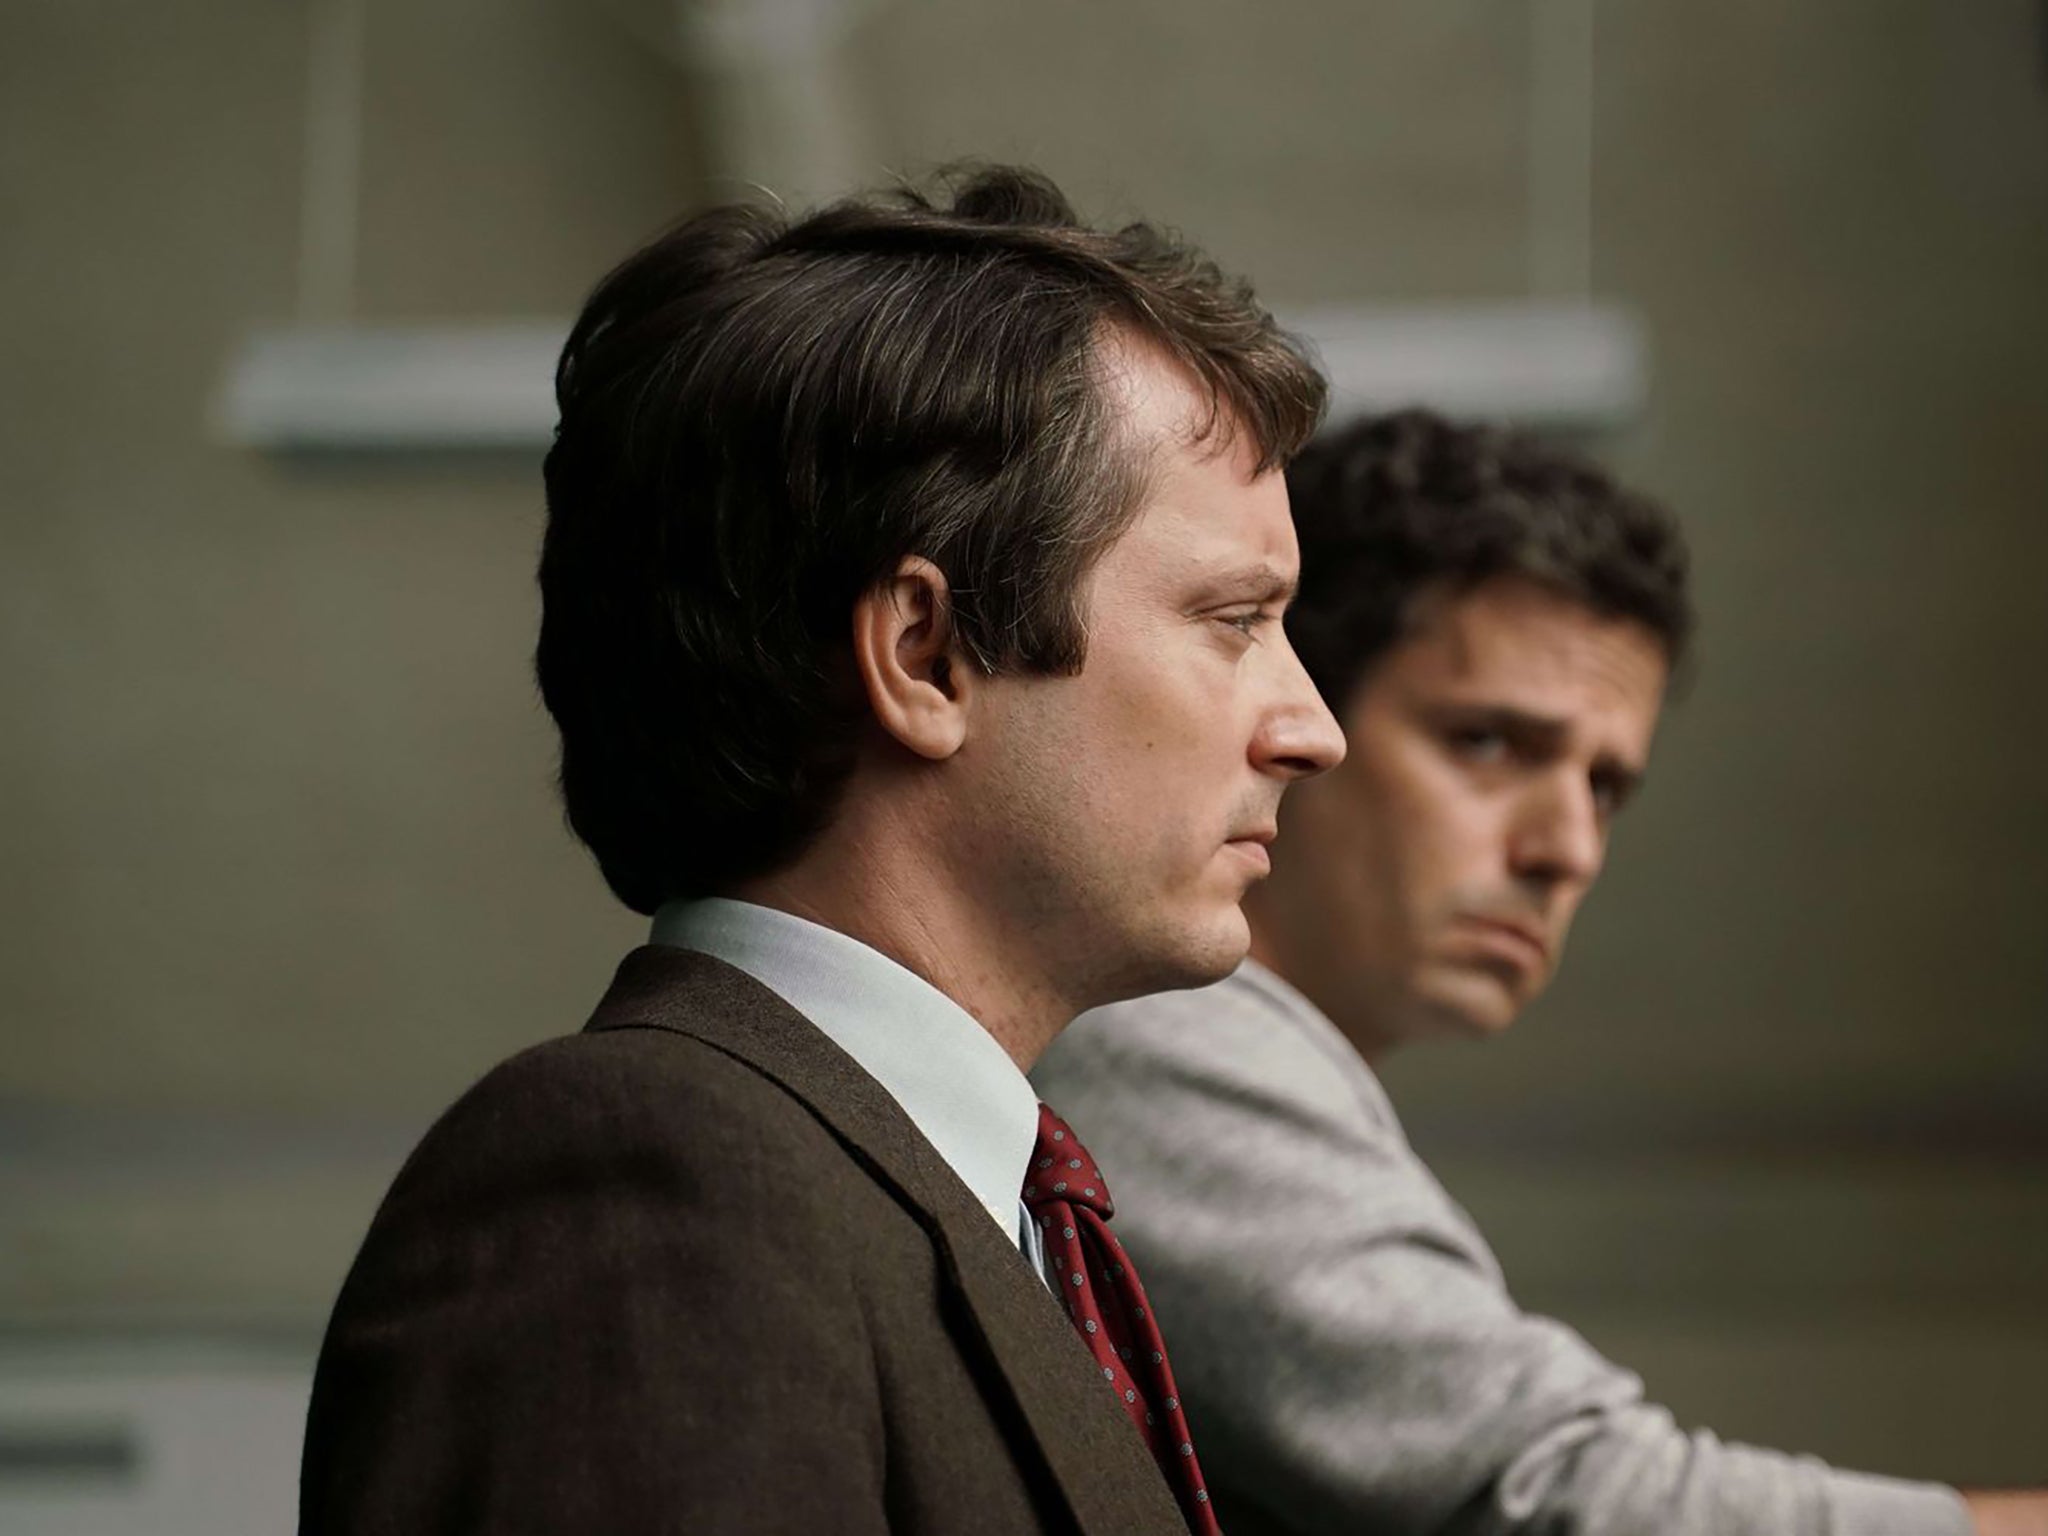 Wood and Luke Kirby, as Ted Bundy, in ‘No Man of God'